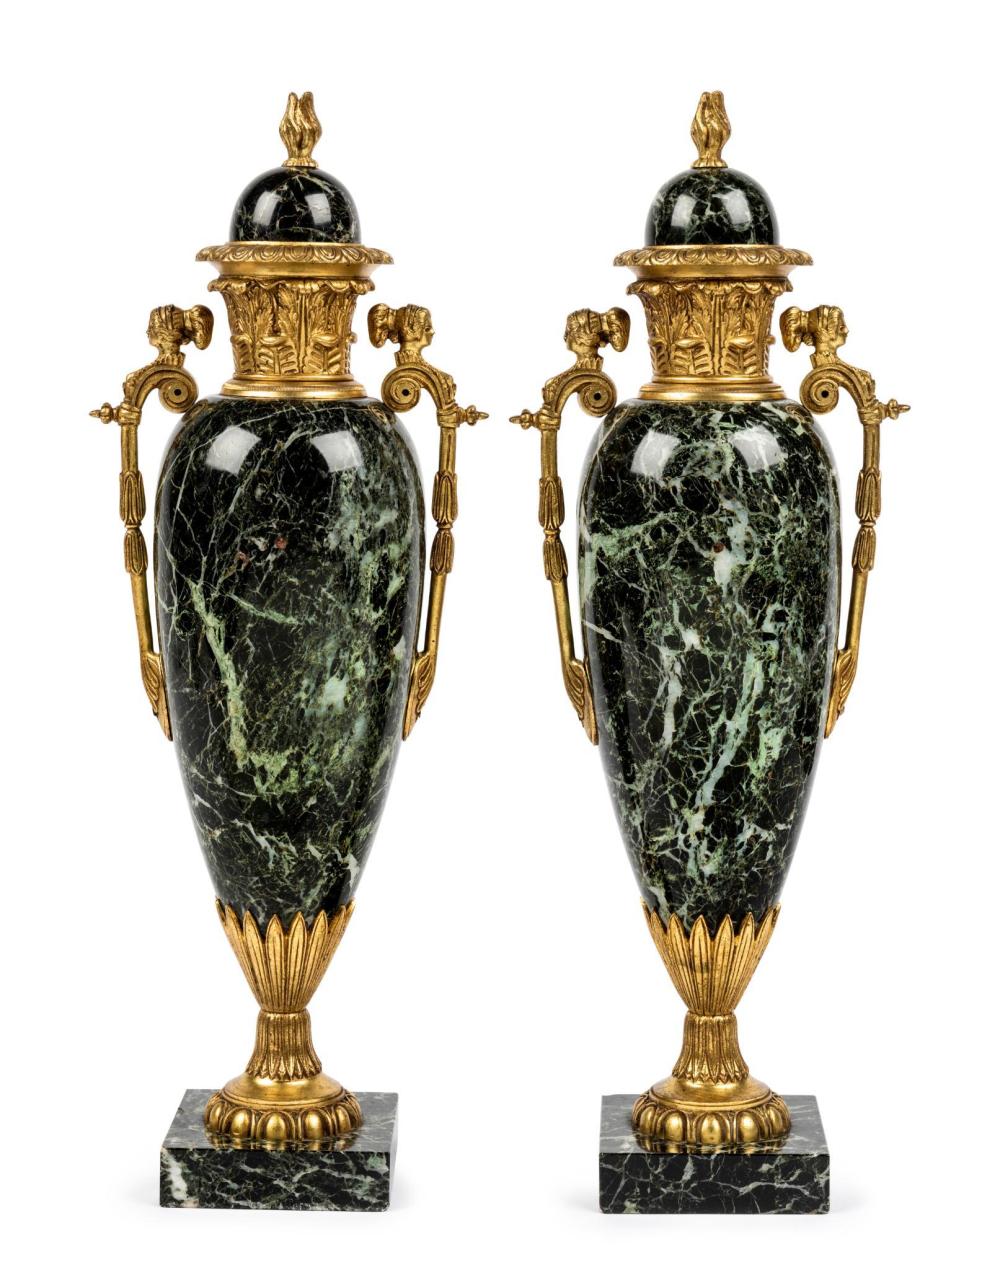 A Pair Of Gilt Bronze Mounted Marble Cassolettes, French 19th Century